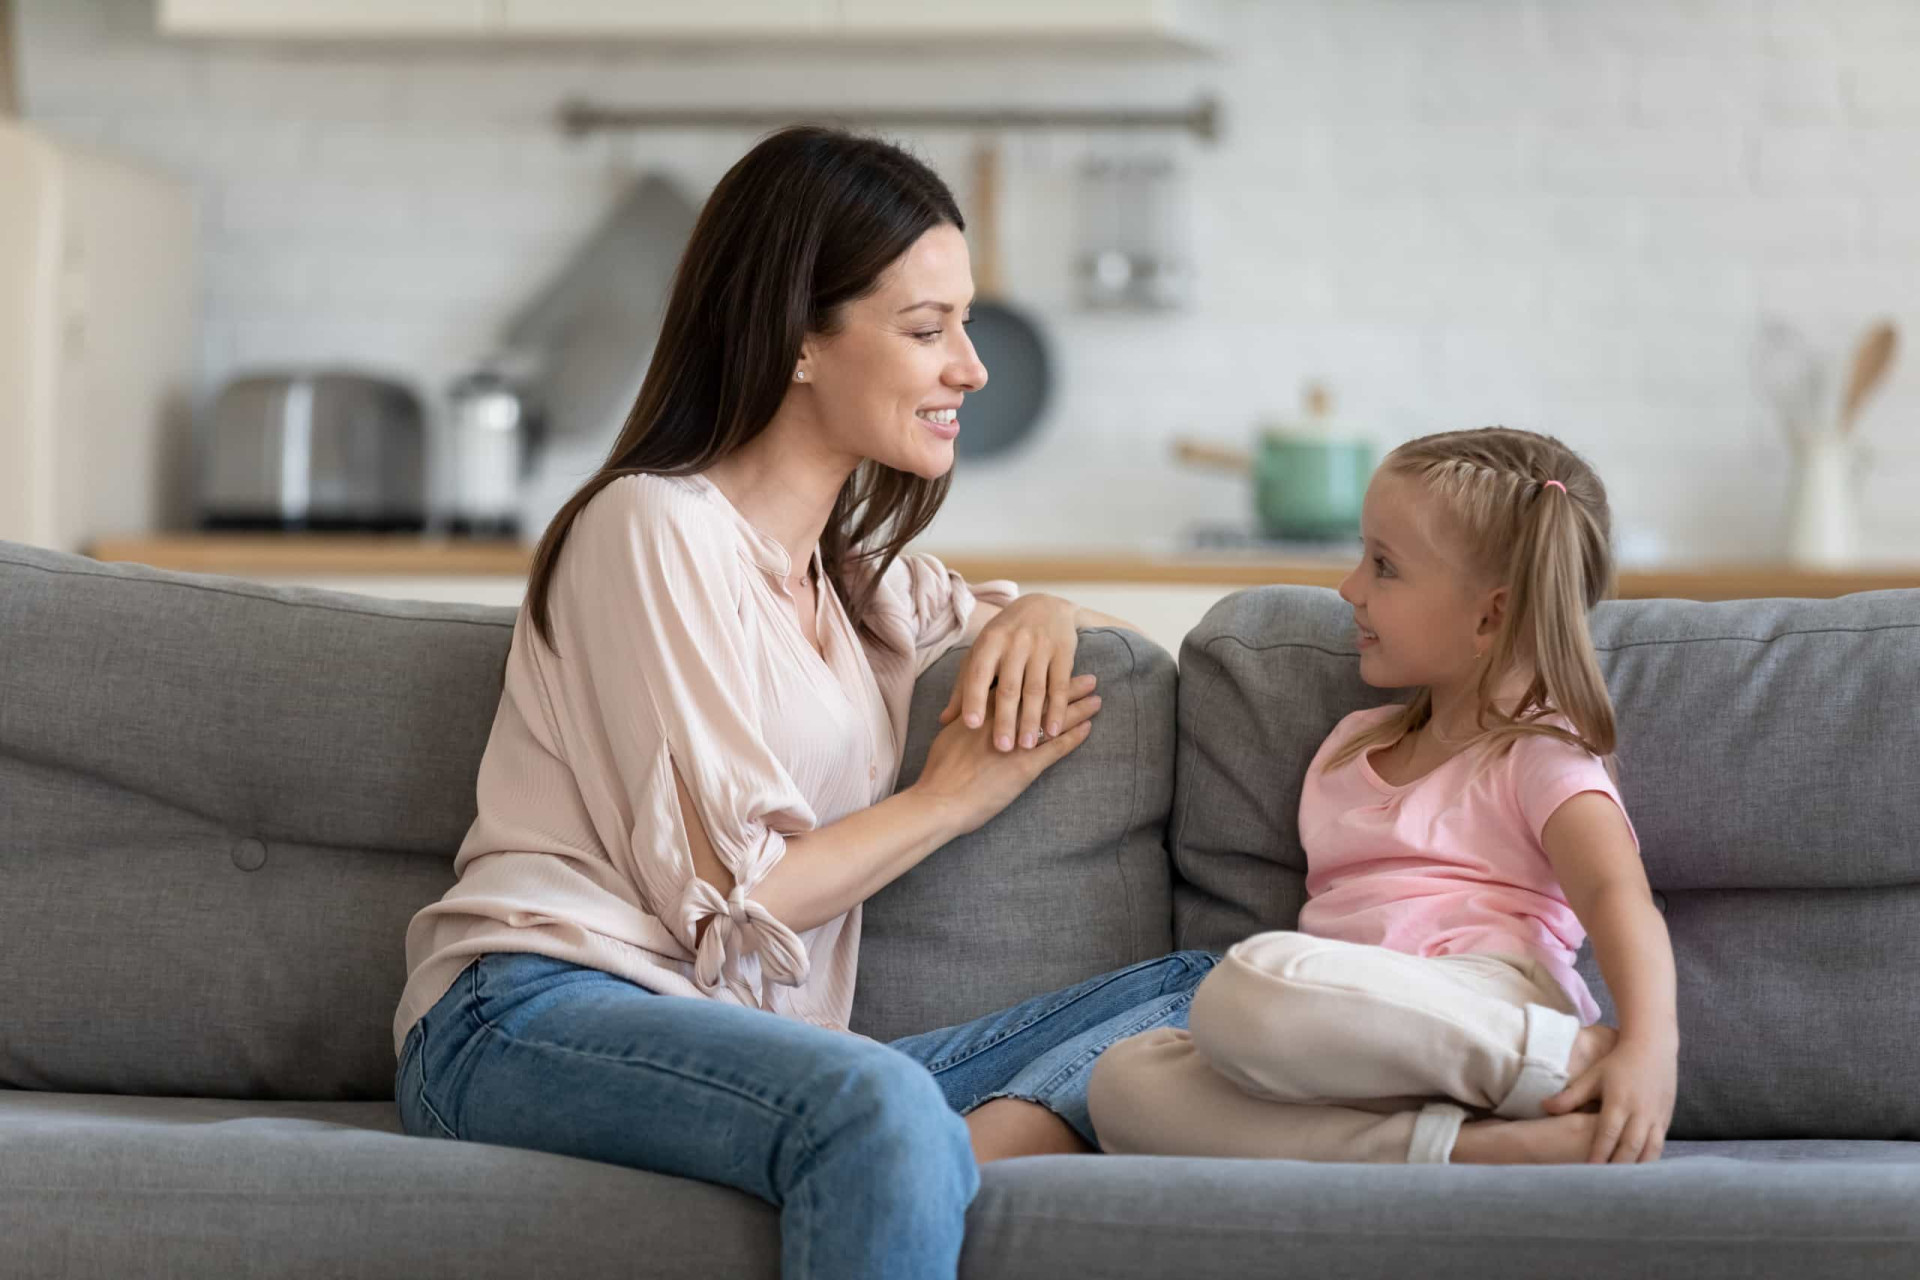 <p>This parenting style tends to take on the role of a friend to the child rather than one that is typically associated with being a parent.</p><p>You may also like:<a href="https://www.starsinsider.com/n/452746?utm_source=msn.com&utm_medium=display&utm_campaign=referral_description&utm_content=467601v2en-en"> Celebrity couples who don't live together</a></p>